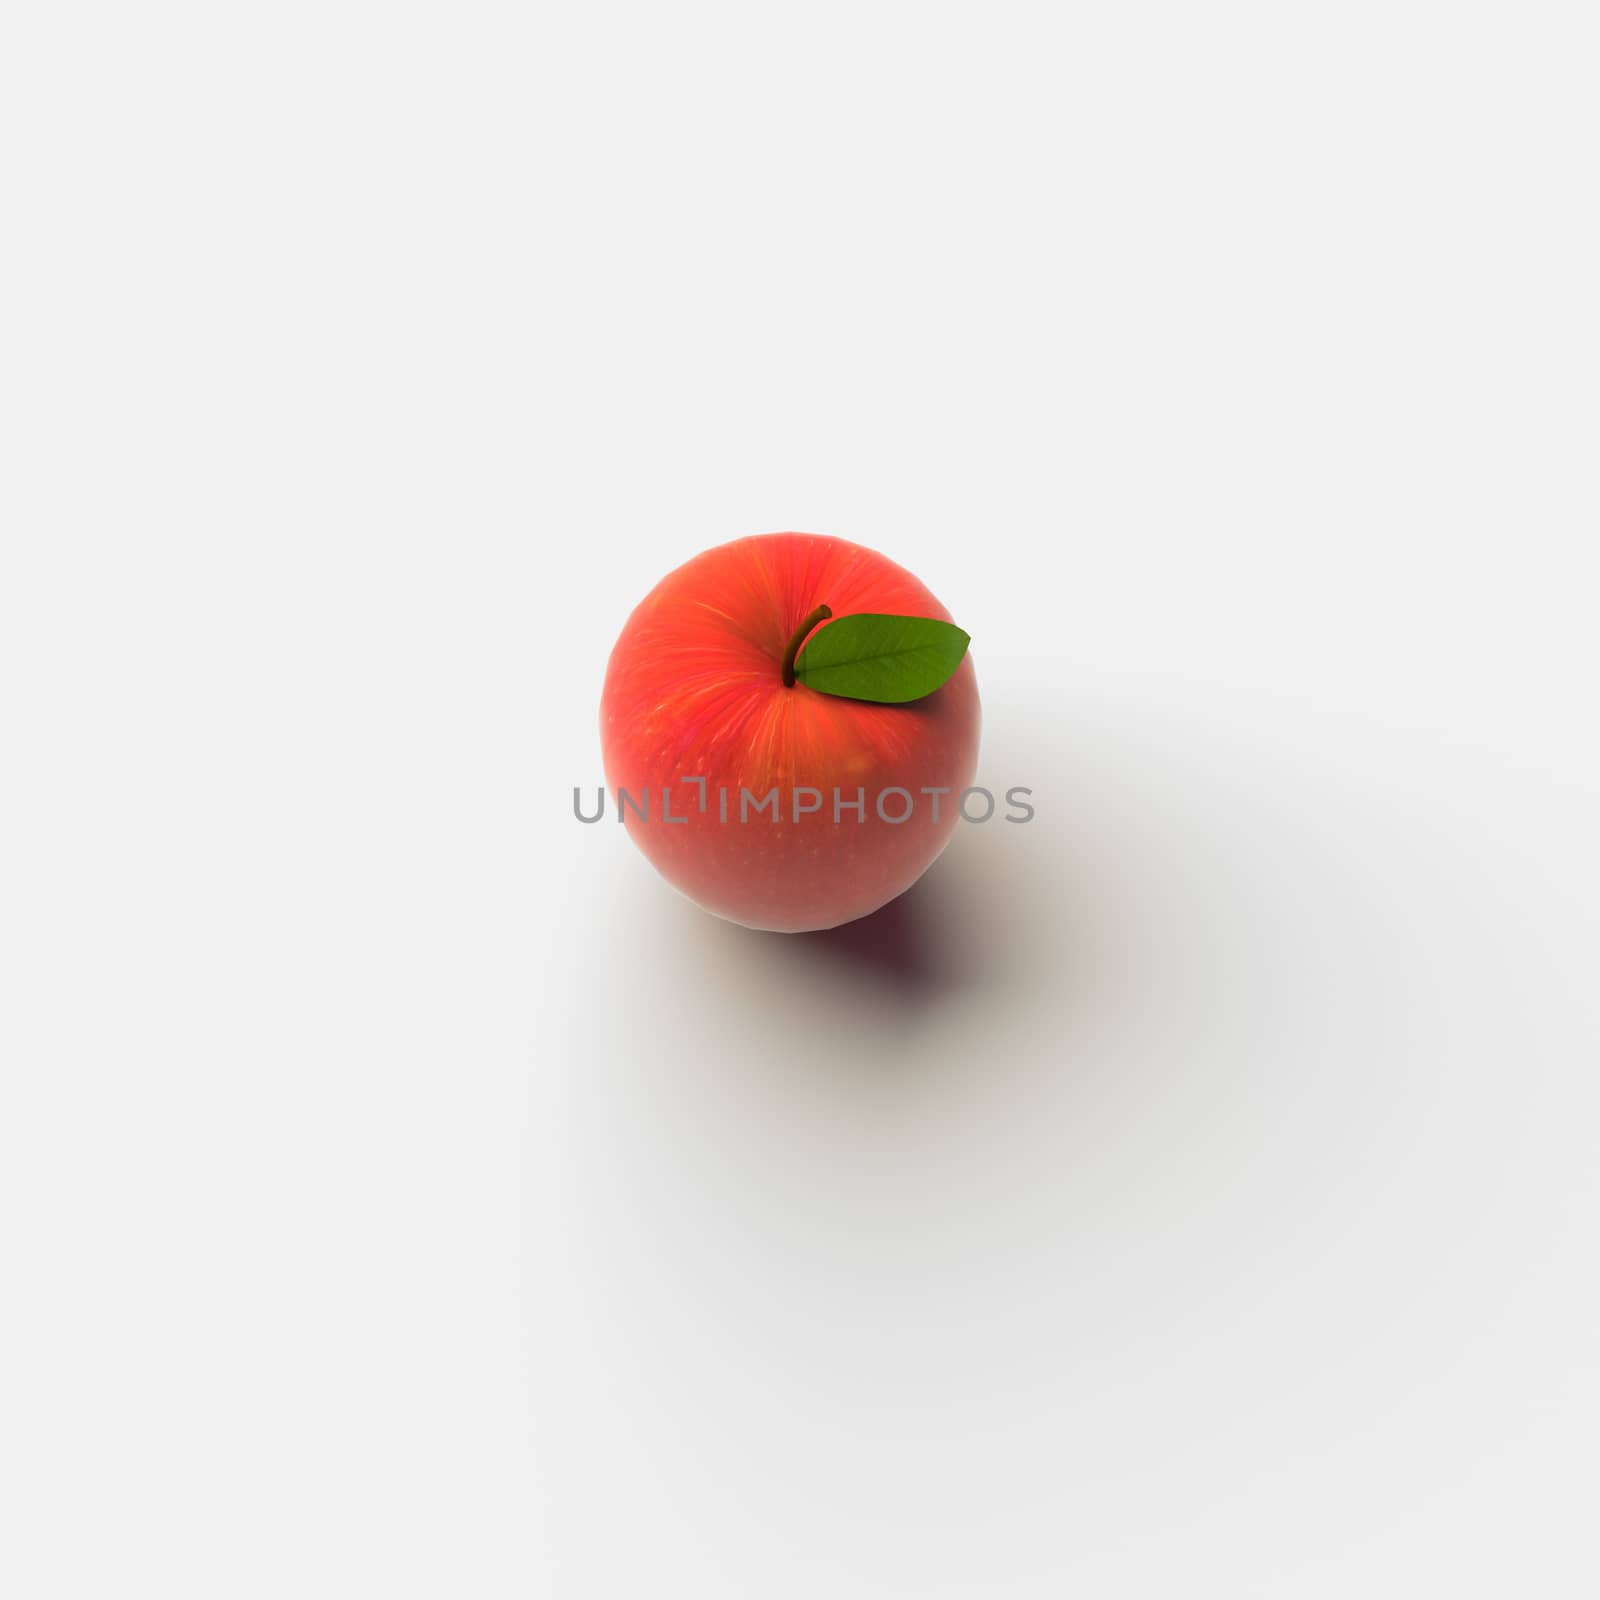 3D RENDERING OF AN APPLE by PrettyTG